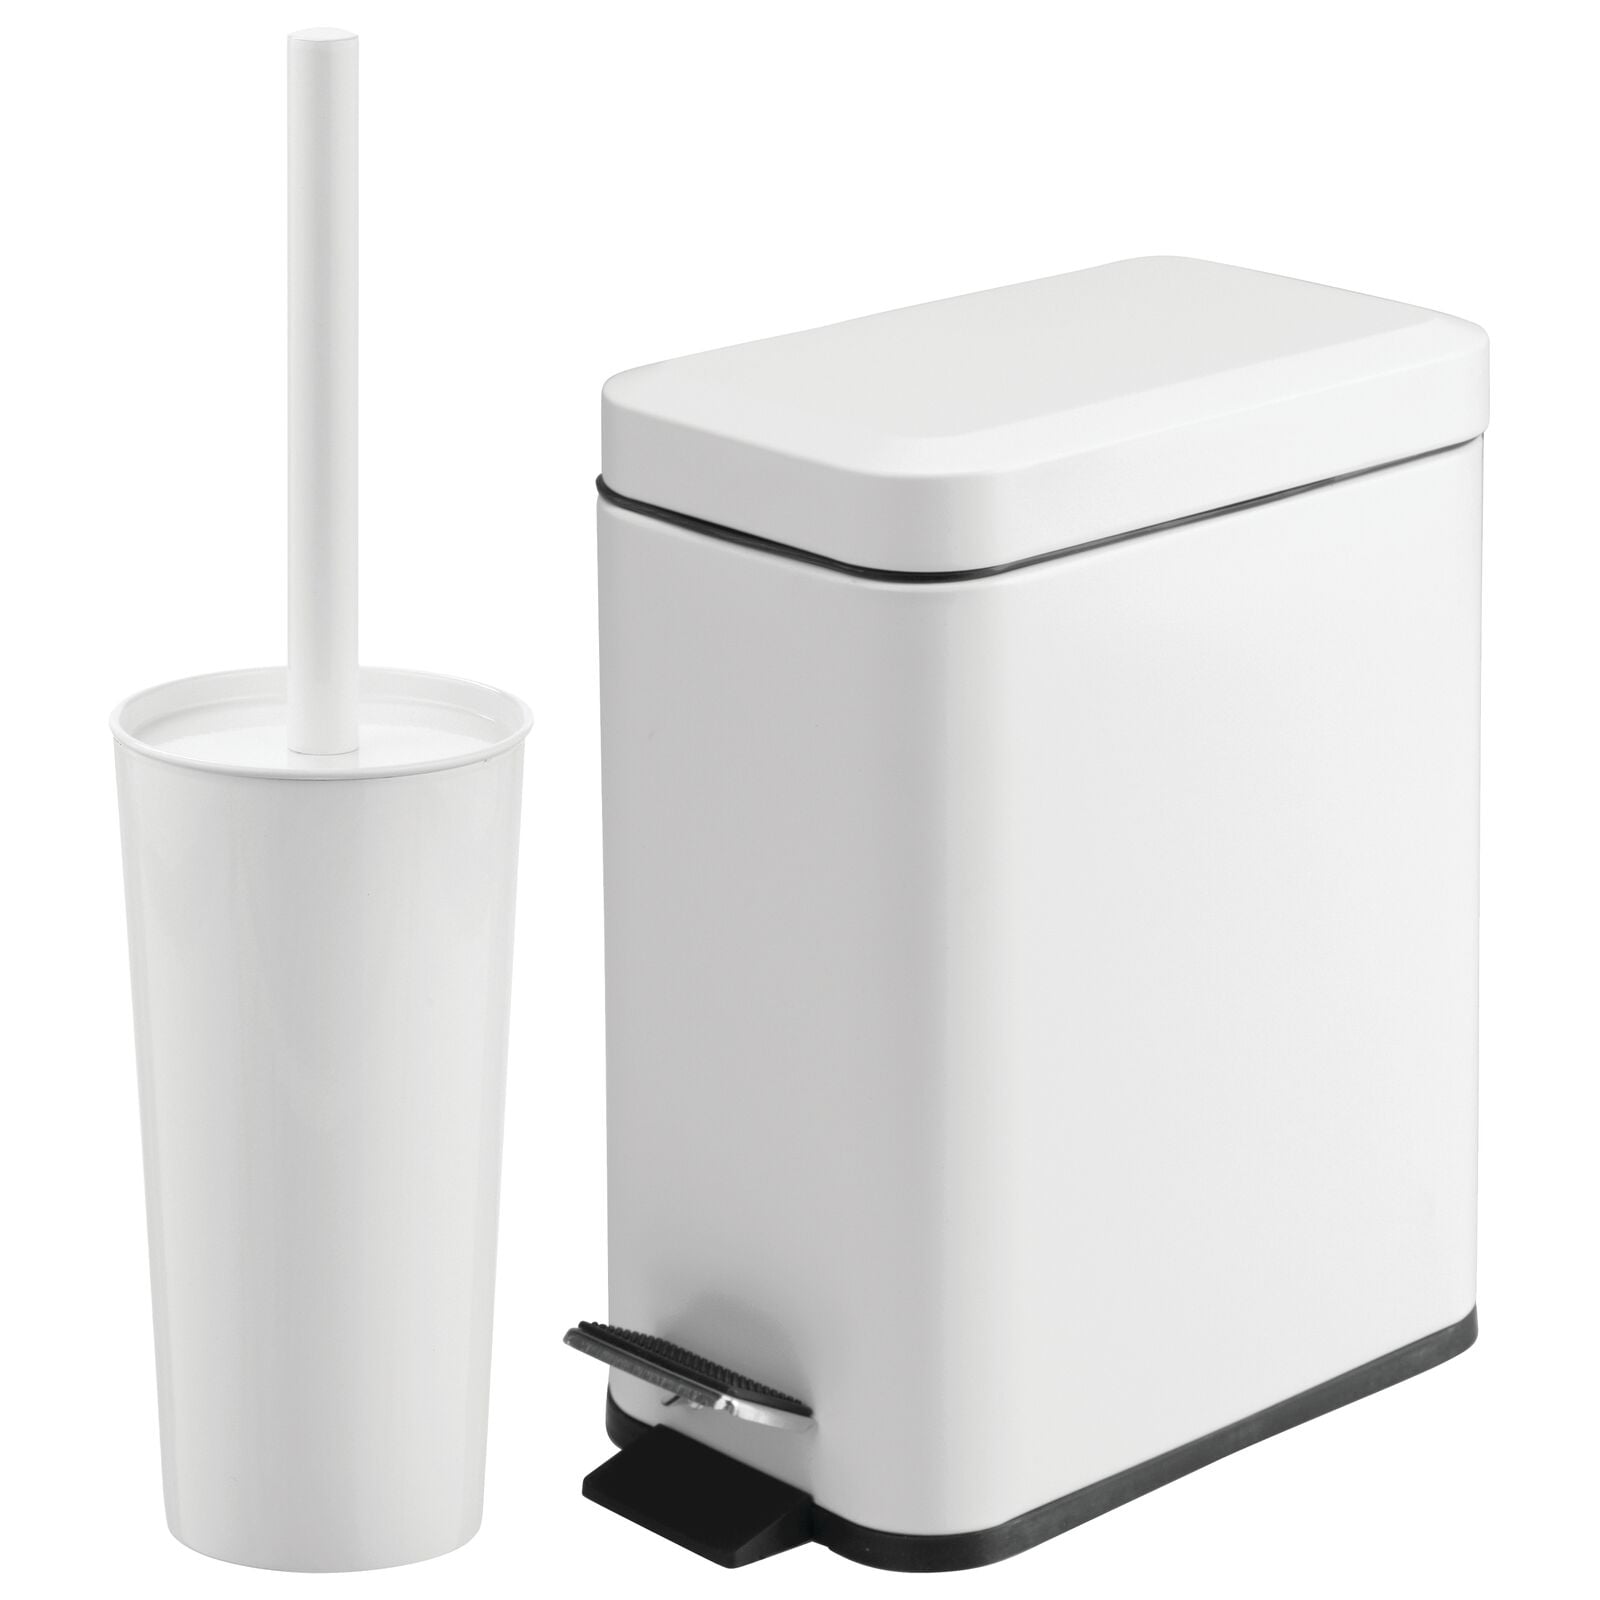 Tabletop Mini Garbage Can Auto Trash Can Waste Storage Bin Dust Holder White 